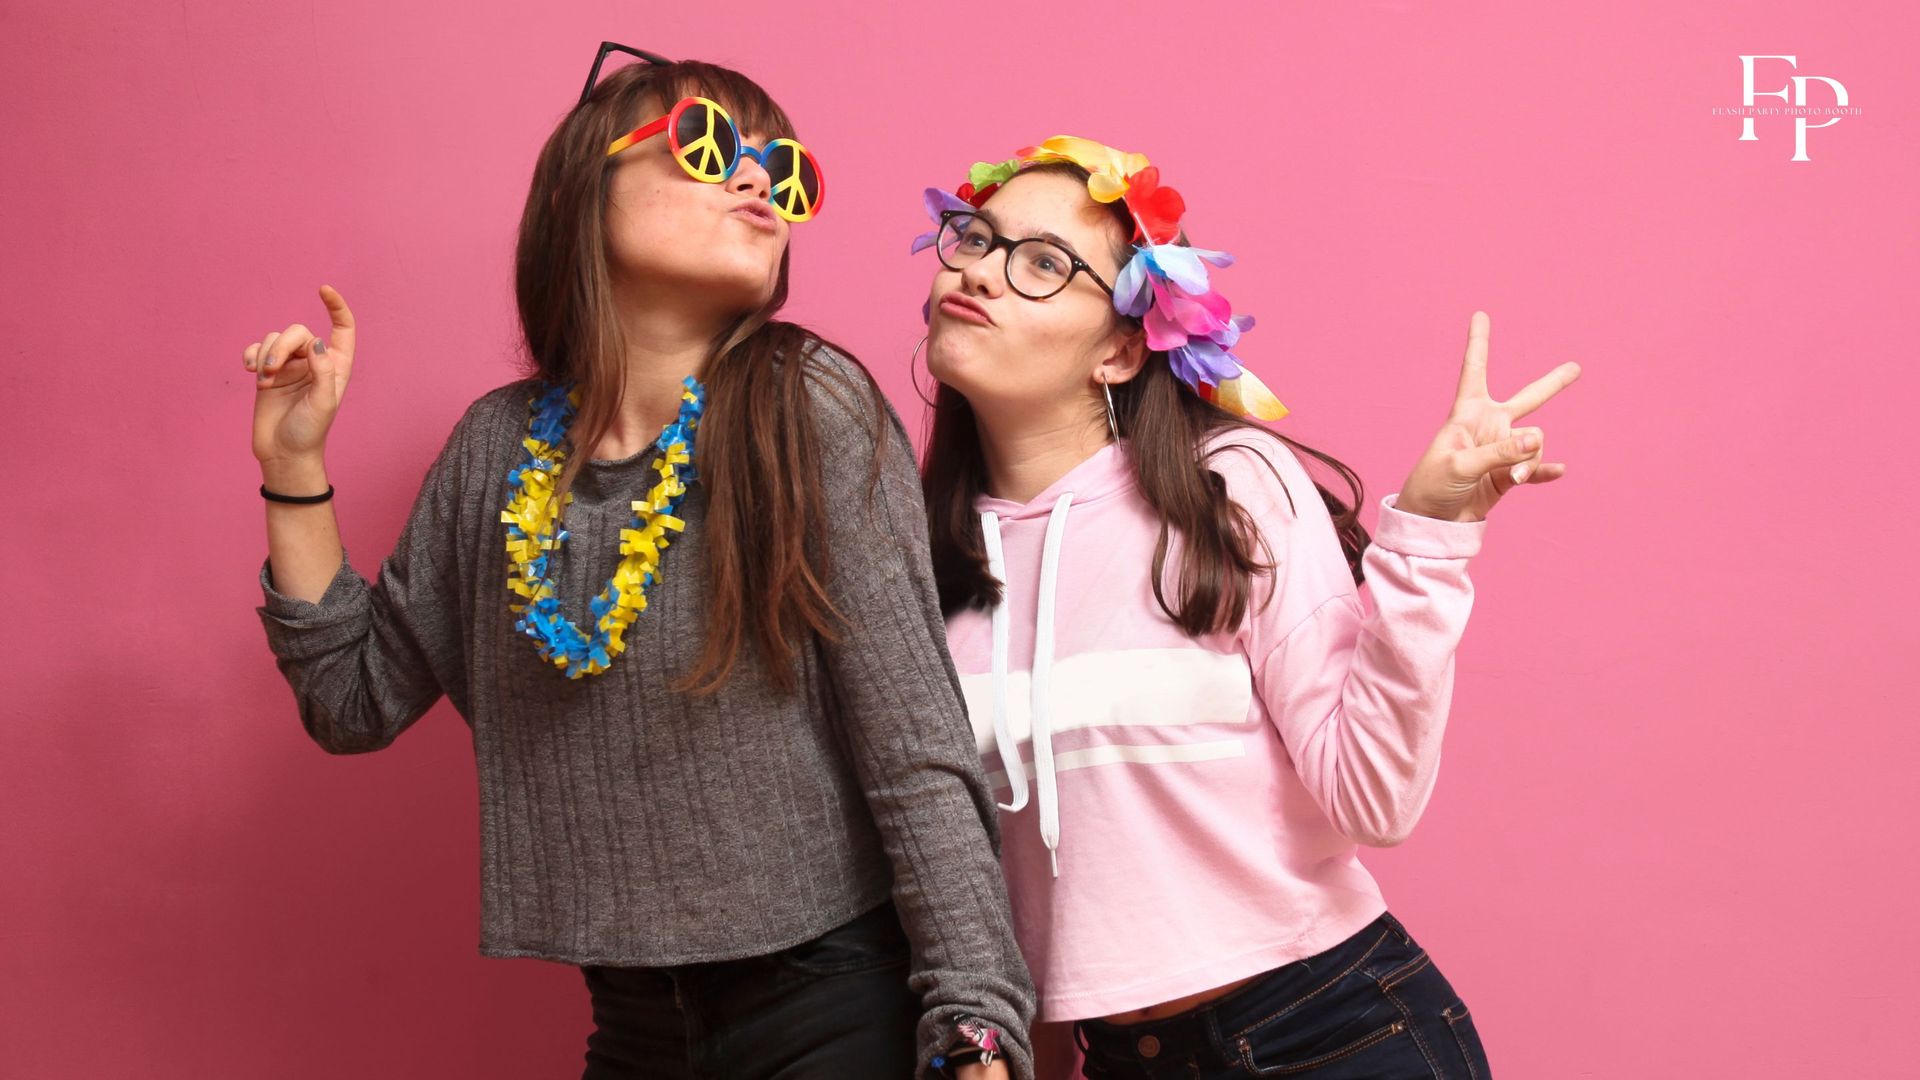 A candid shot of the birthday girl and her best friend at a photo booth setup for a birthday party in Midland